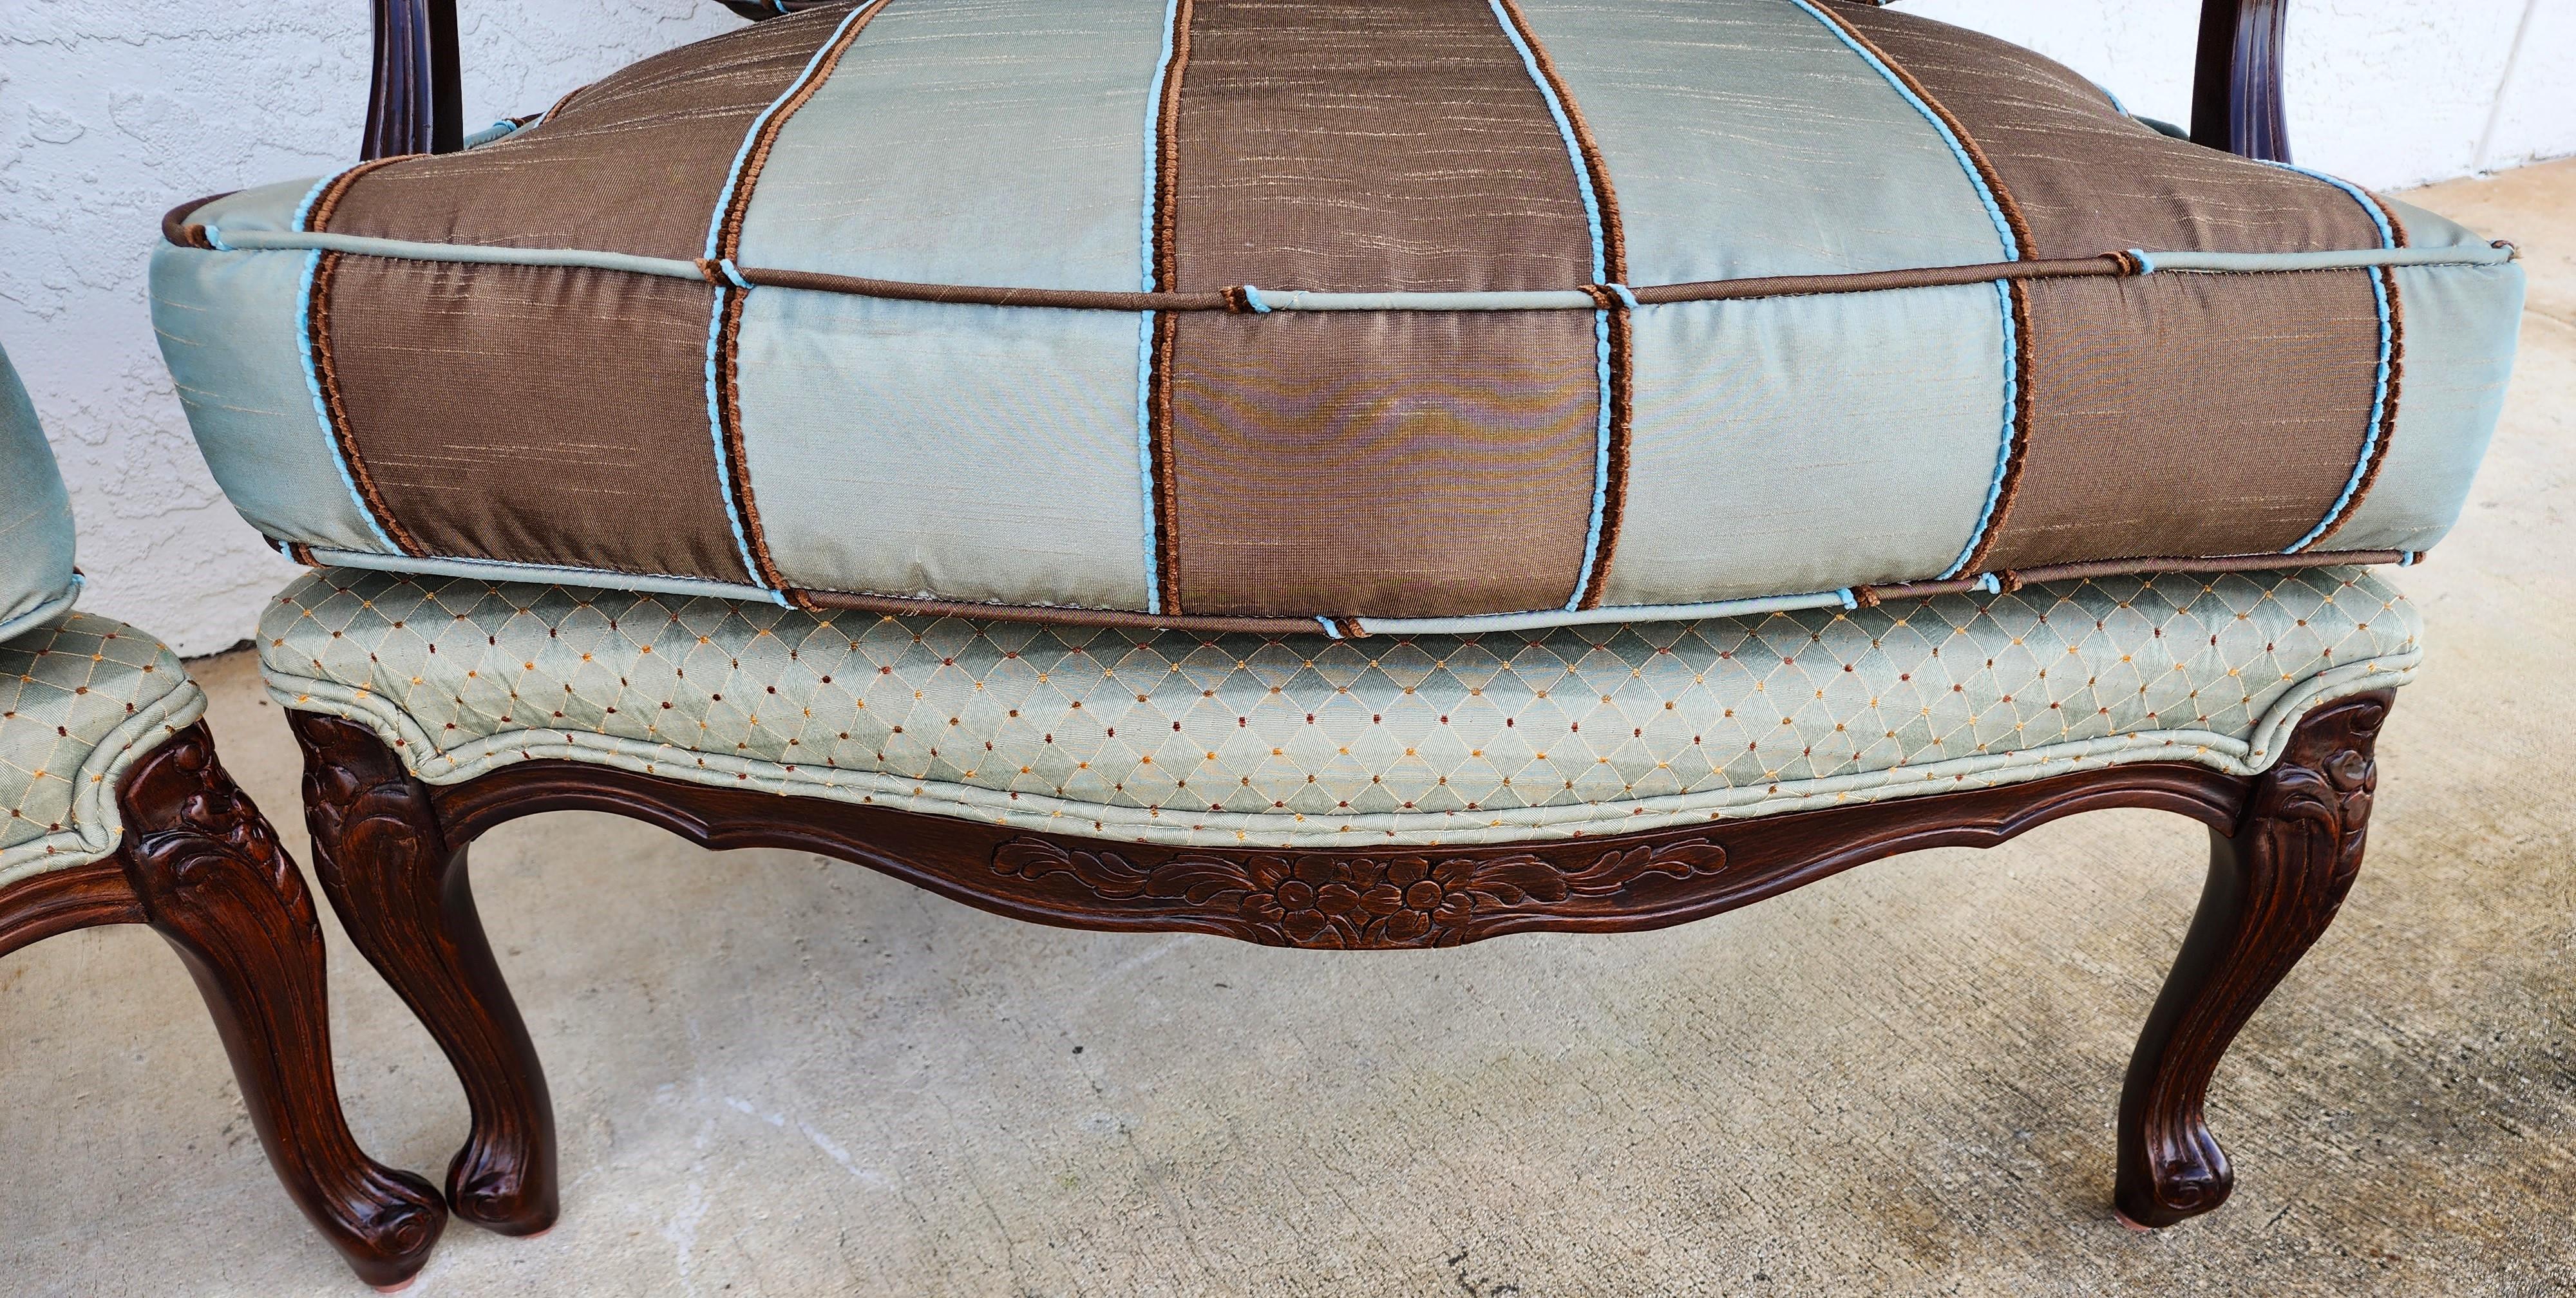 French Provincial Bergere Lounge Chairs Louis XV Silk In Good Condition For Sale In Lake Worth, FL